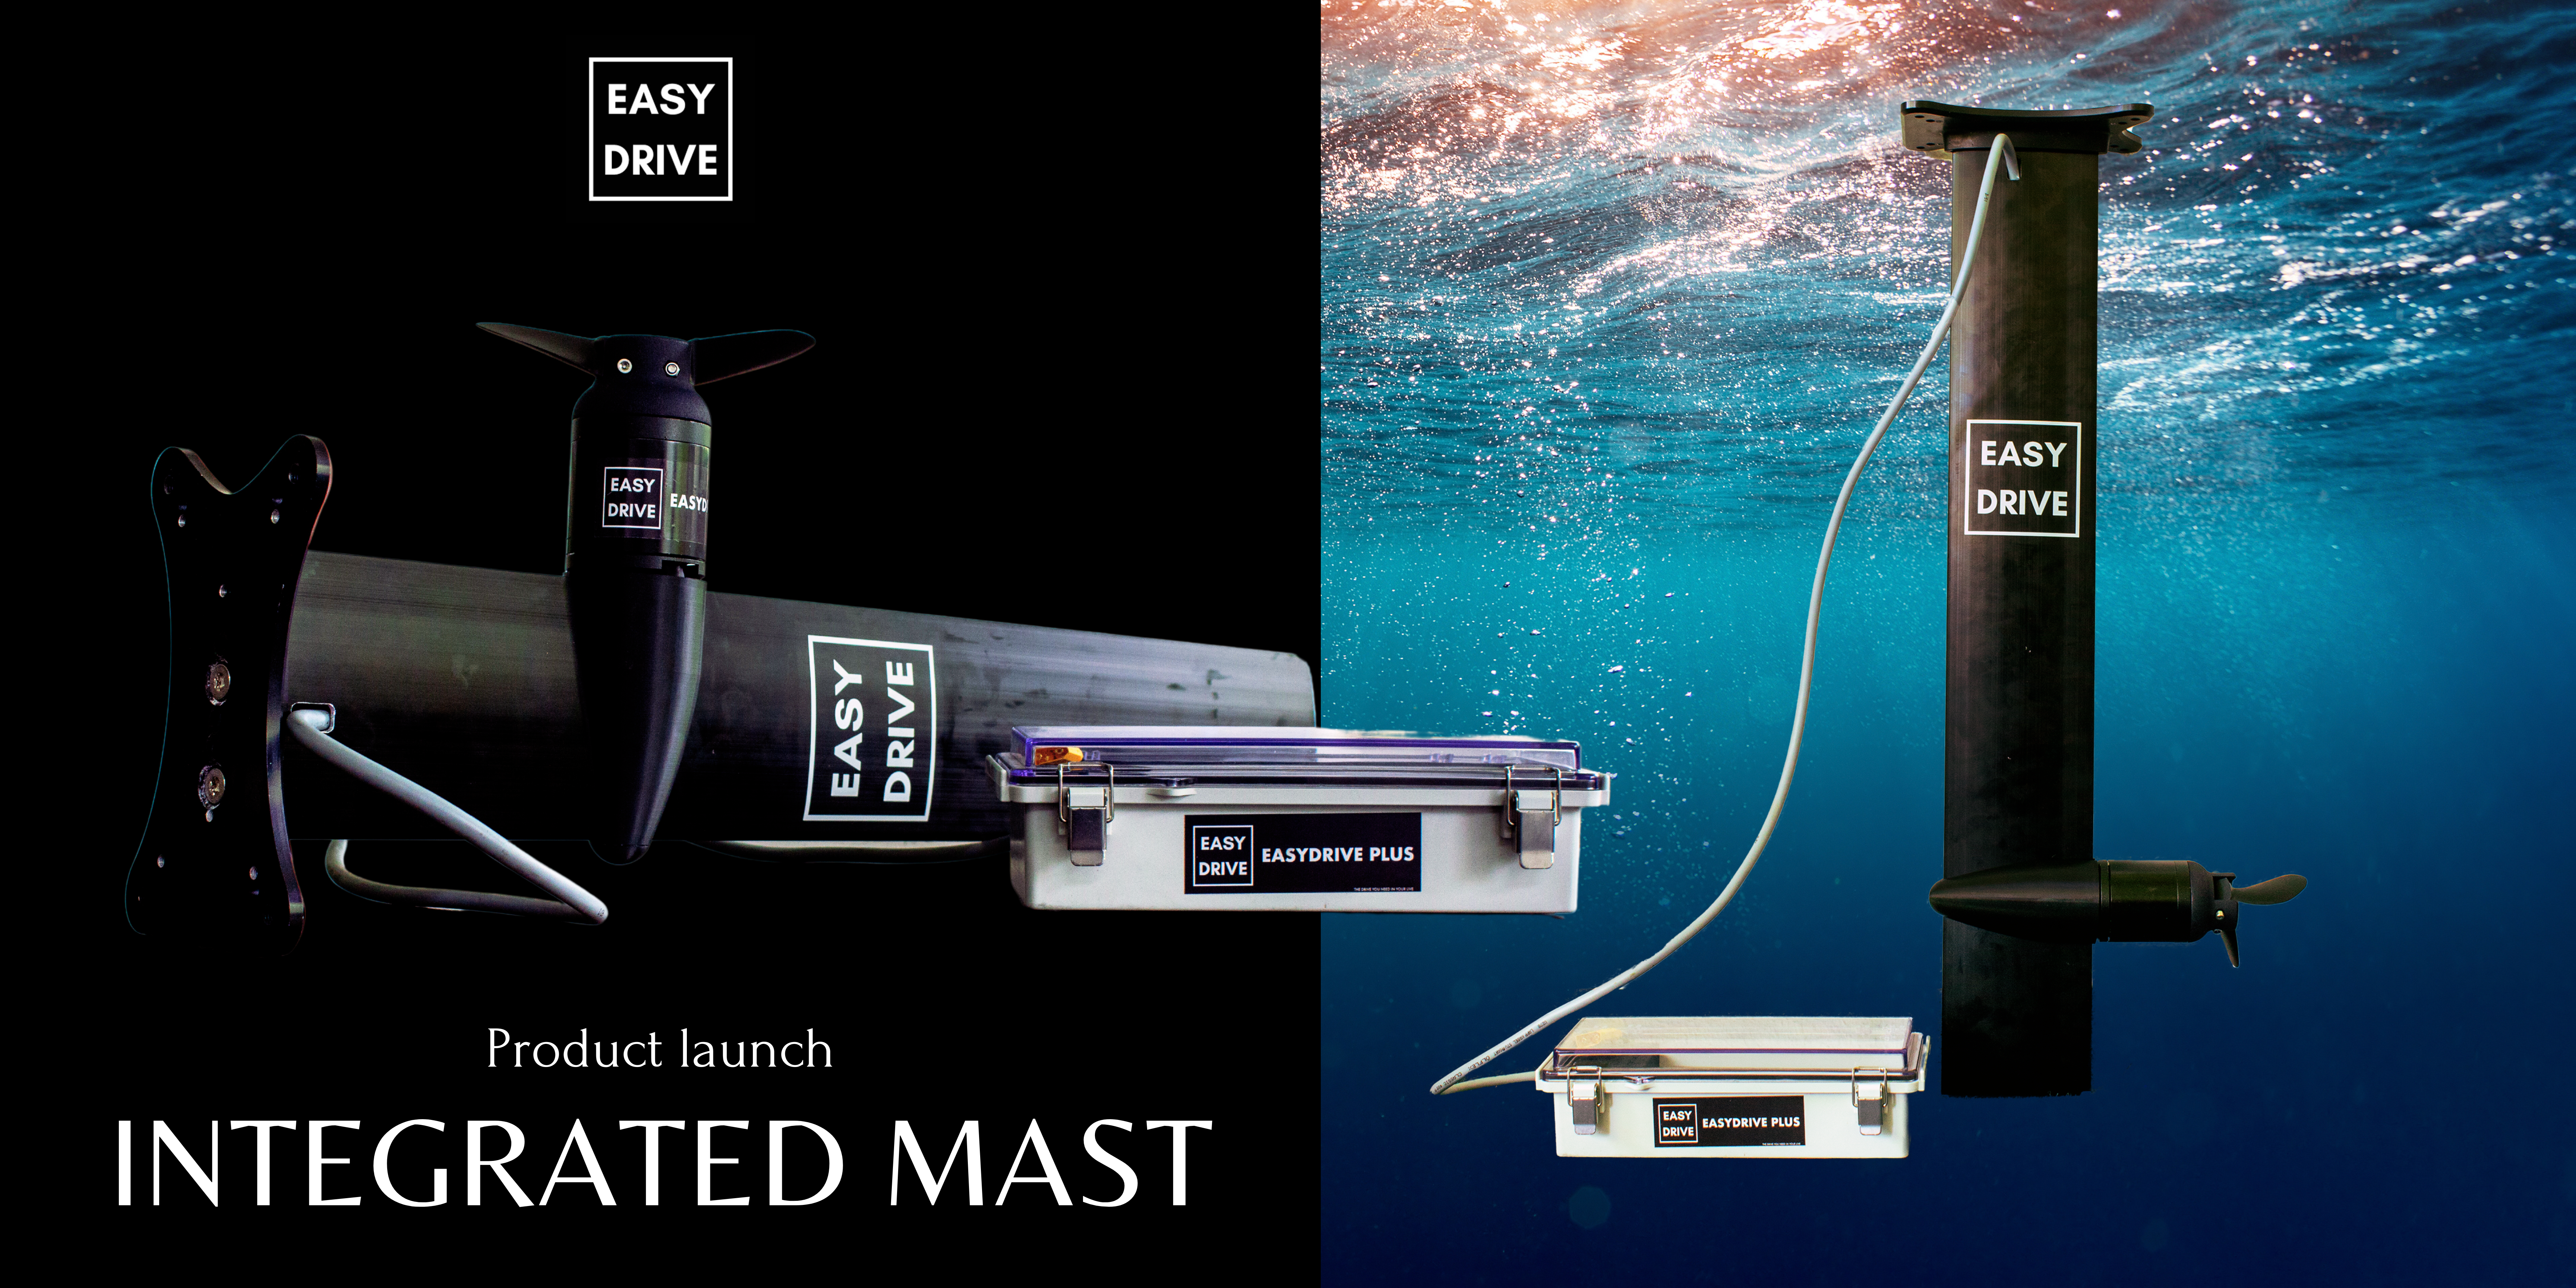 PRODUCT LAUNCH integrated mast